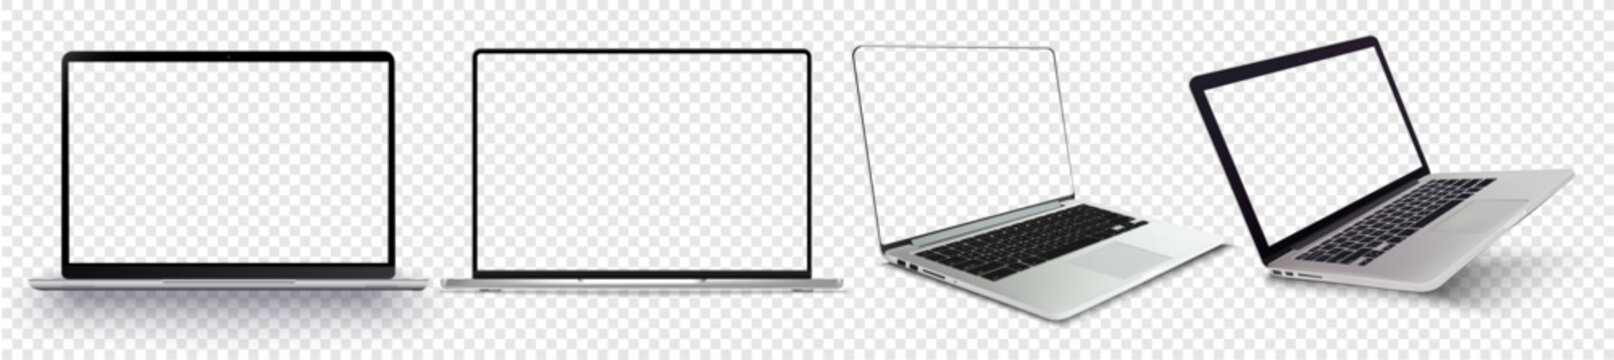 Set of sleek, modern laptops and tablets featuring transparent screen displays, isolated on a white background for easy customization. Variety of Modern Laptops and Tablets up different angles views.